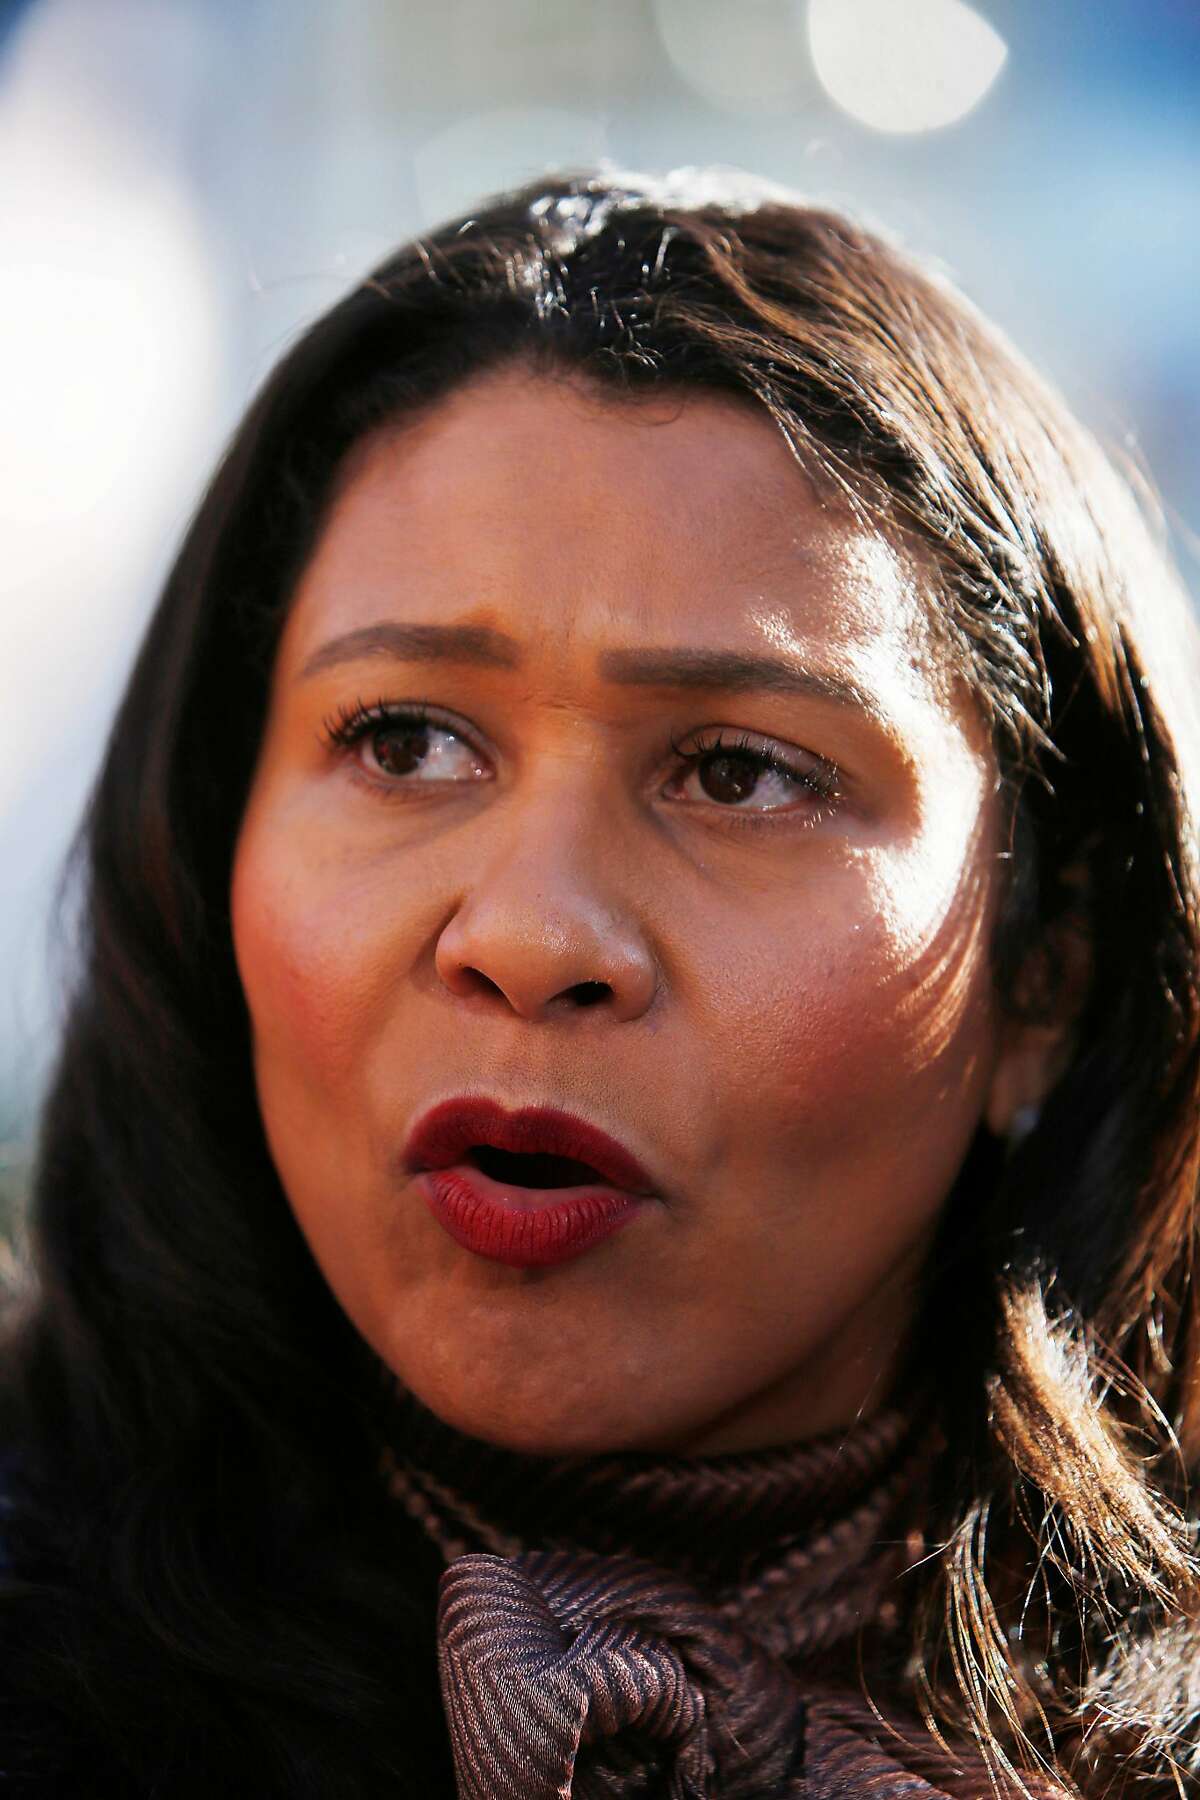 Mayor London Breed answers questions from the media after speaking at a press conference at Union Square on Monday, December 16, 2019 in San Francisco, Calif.